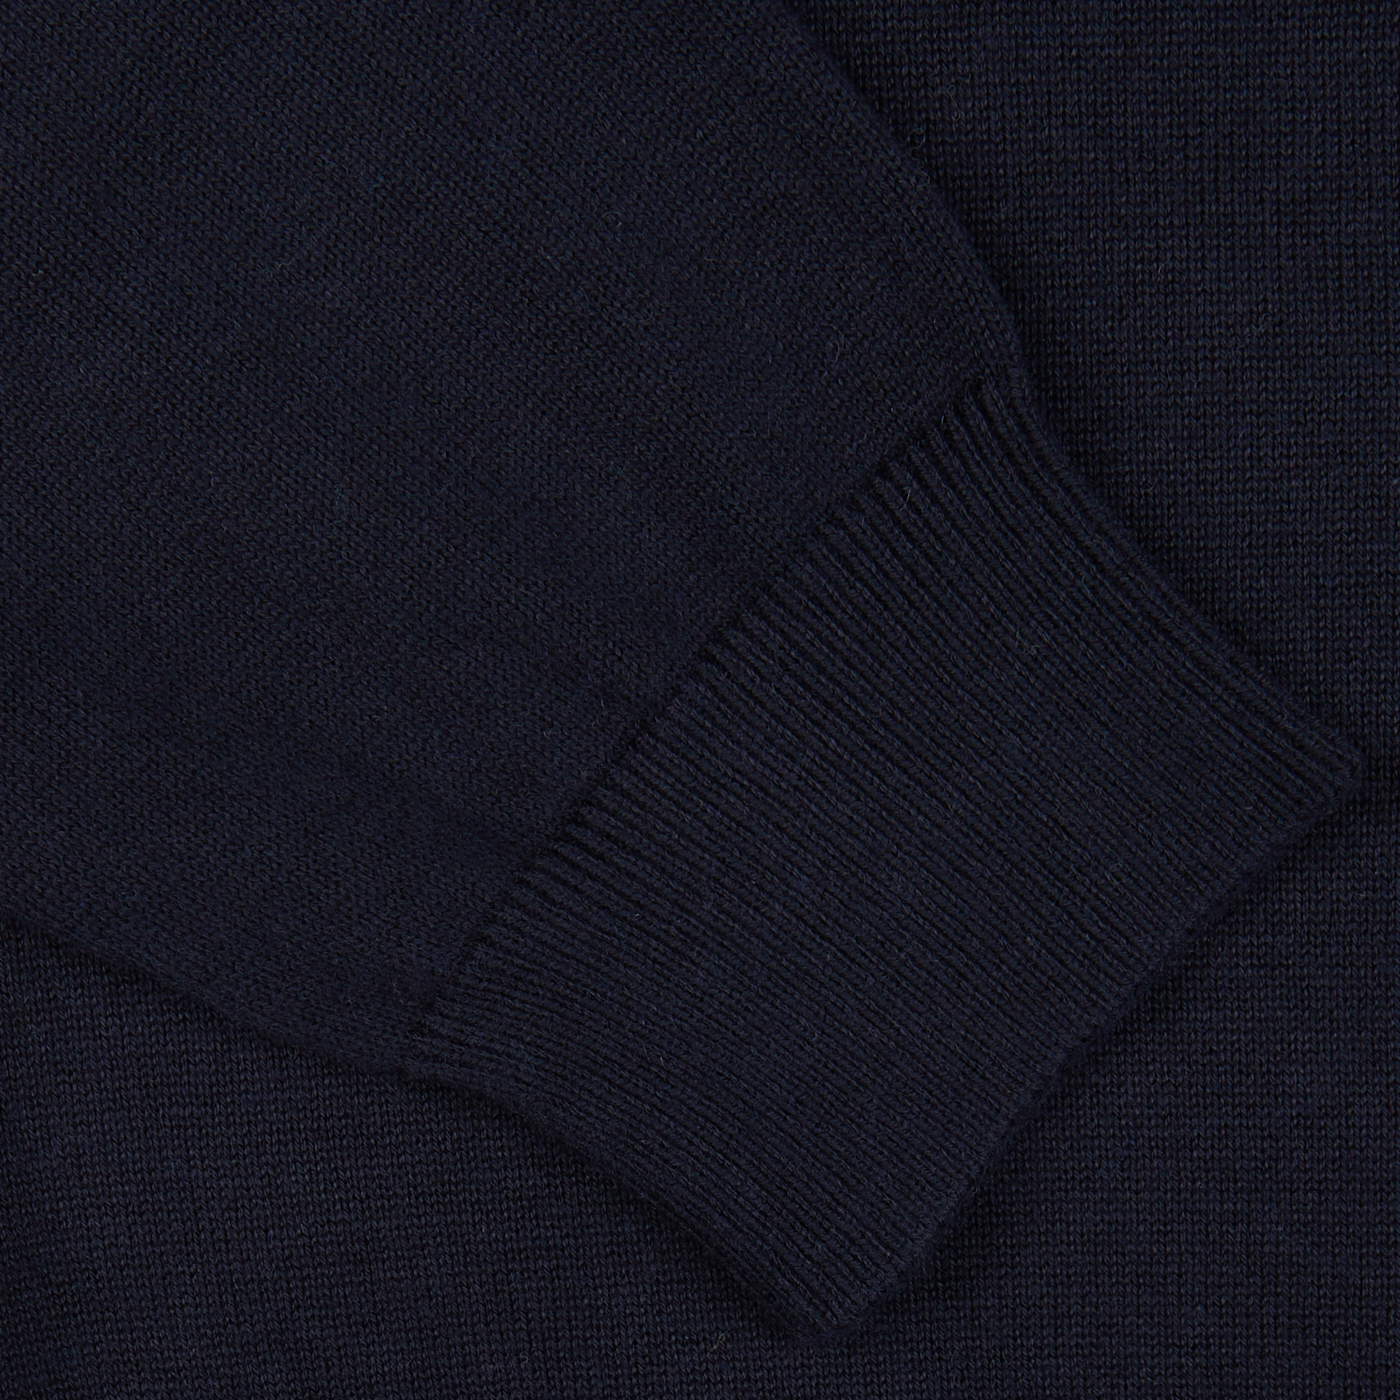 Close-up of Alan Paine's Navy Blue Luxury Cotton Crewneck with a ribbed cuff detail.